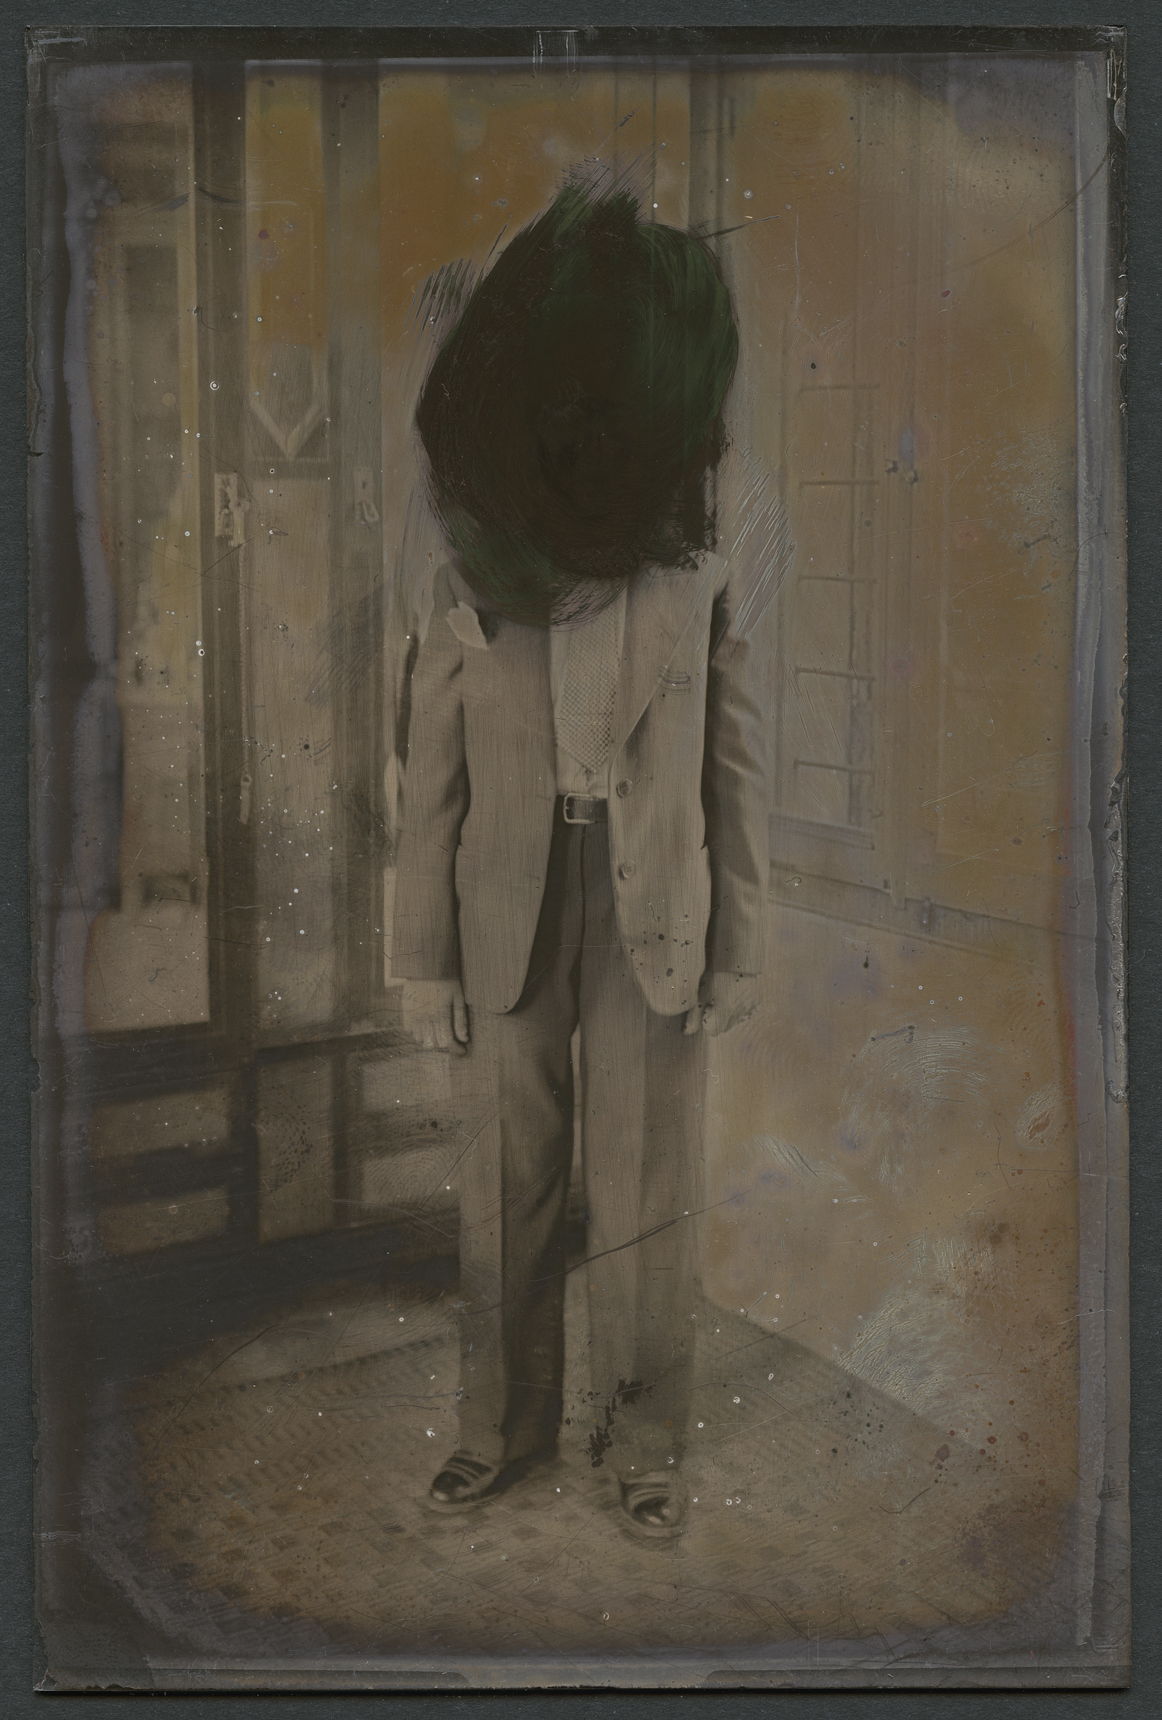 Woman dressed up in a suit, Muhamad Orabi, undated, Tripoli, Lebanon. 
Mohsen Yammine Collection, courtesy of the Arab Image Foundation, Beirut